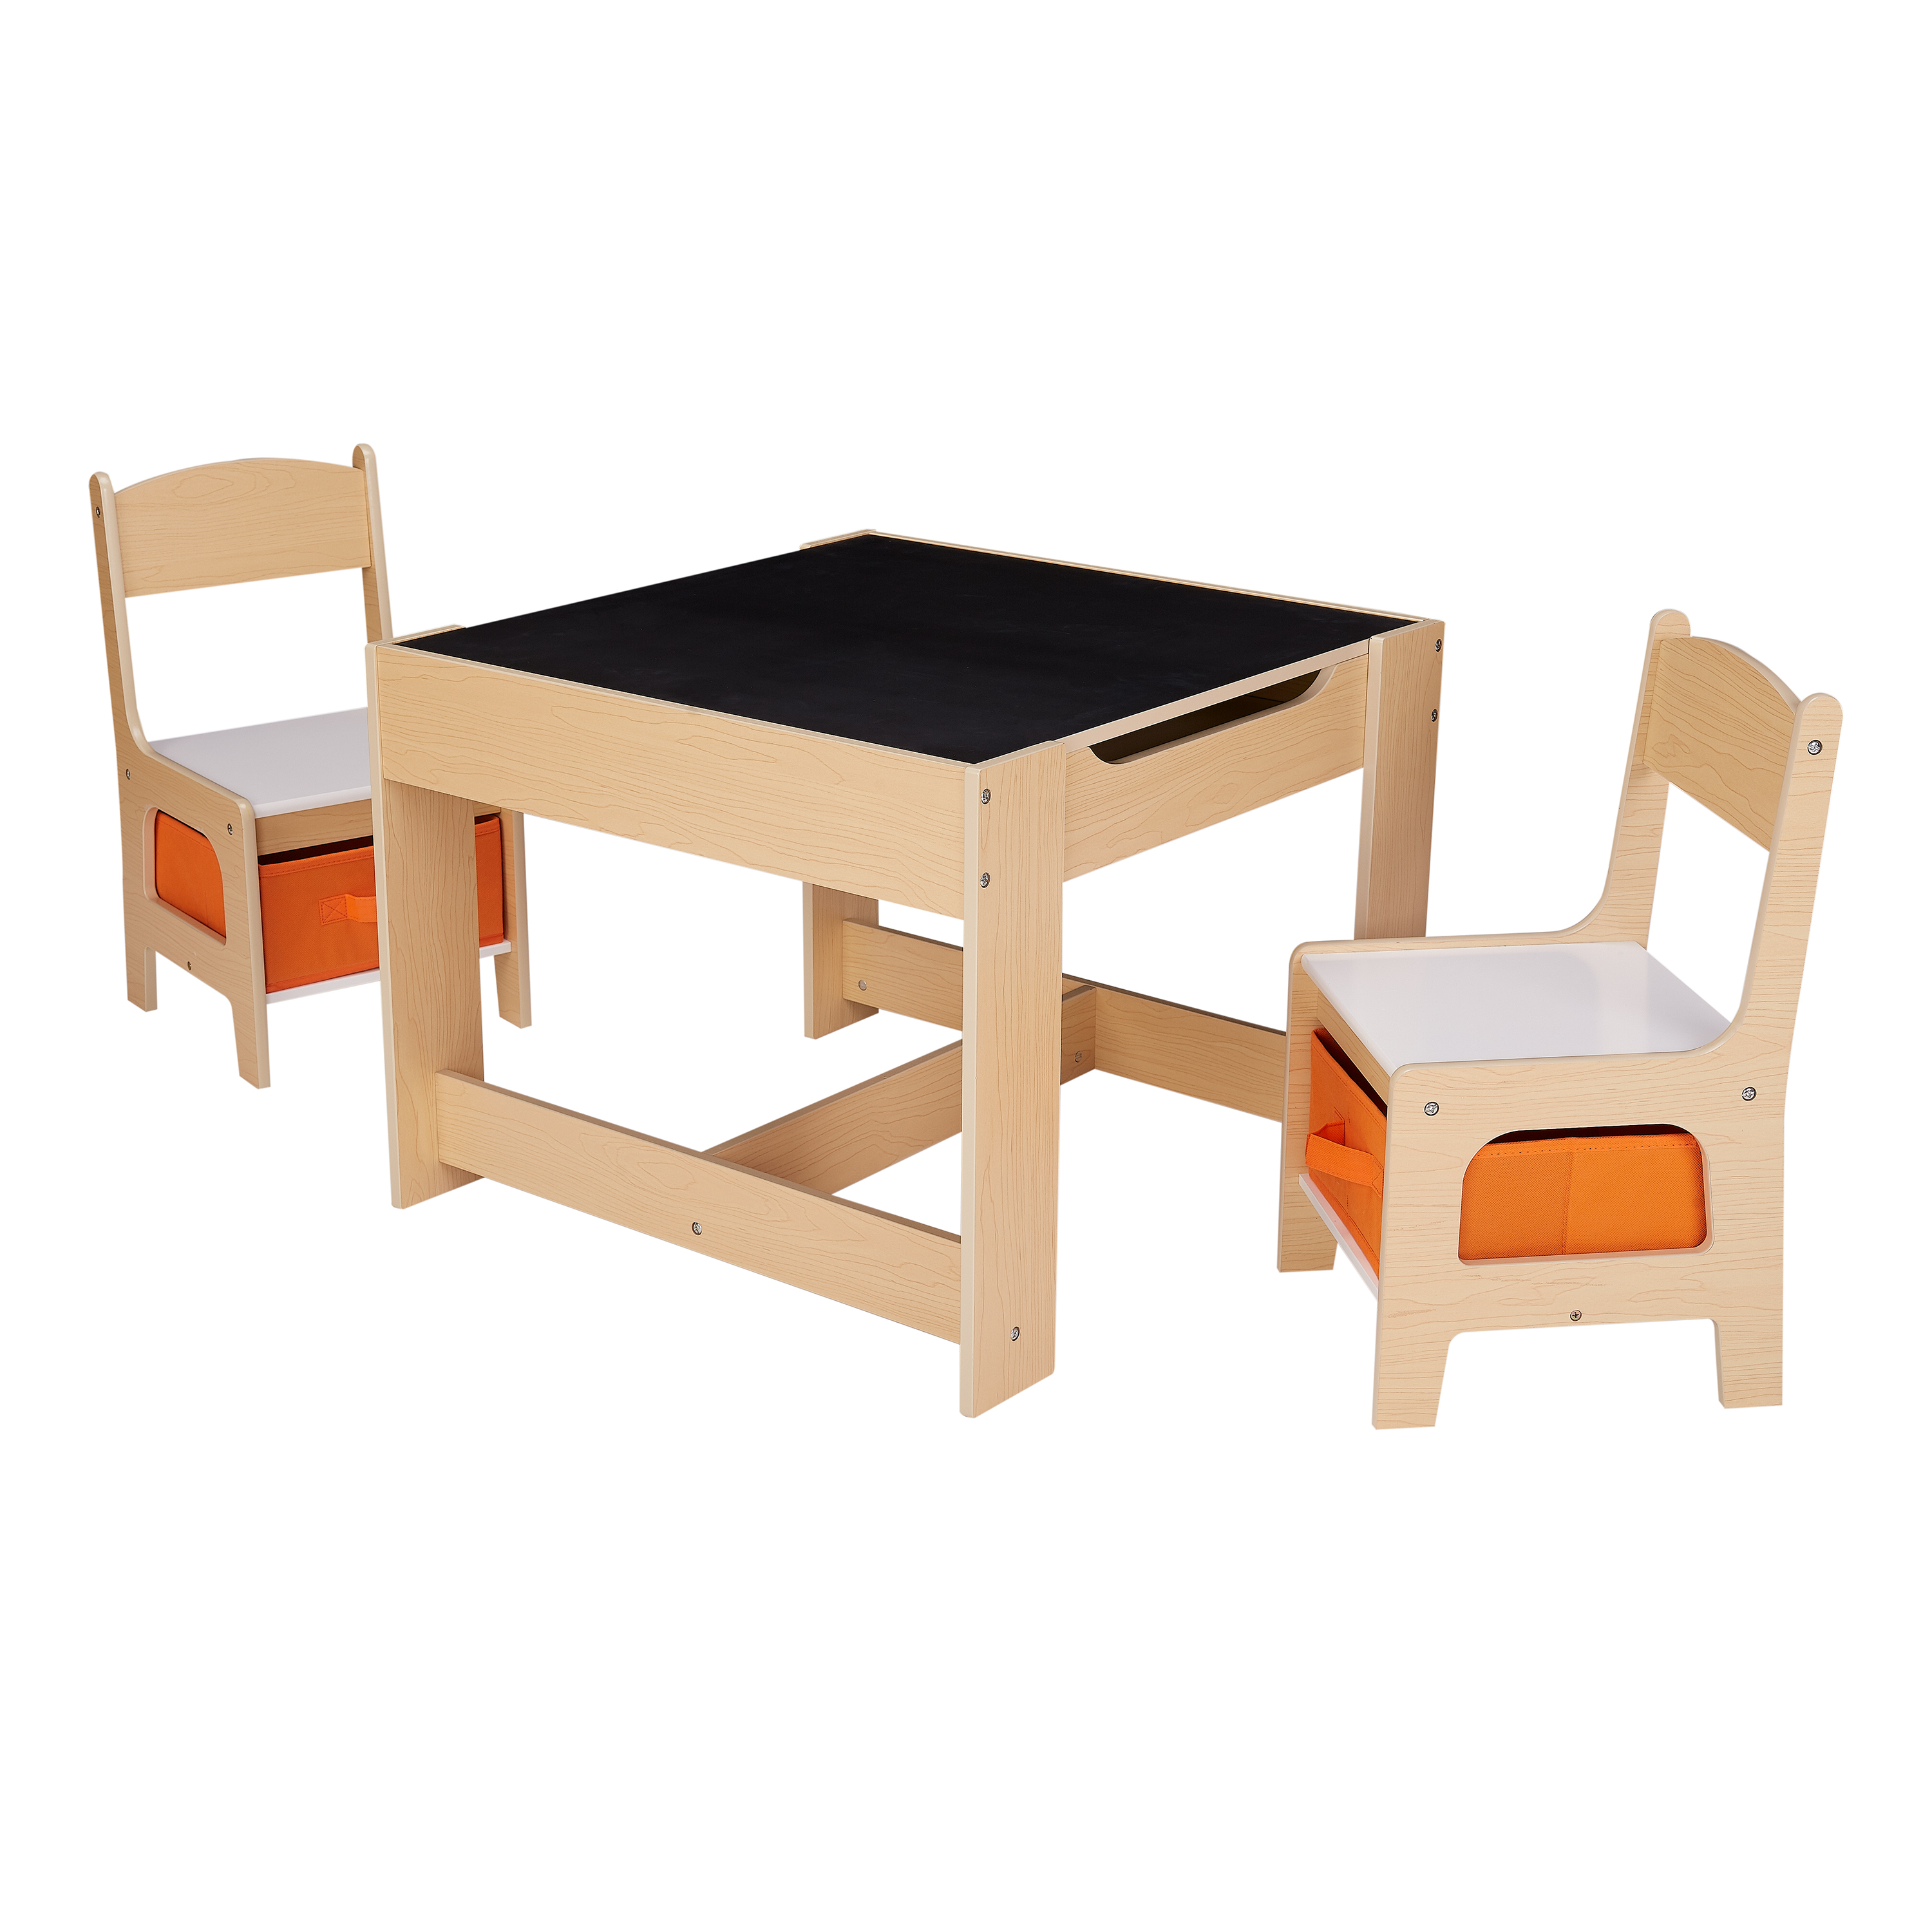 Senda Kids 3 Piece Wooden Storage Table and Chairs Set, White and Natural, Ages 3-7 - image 3 of 8